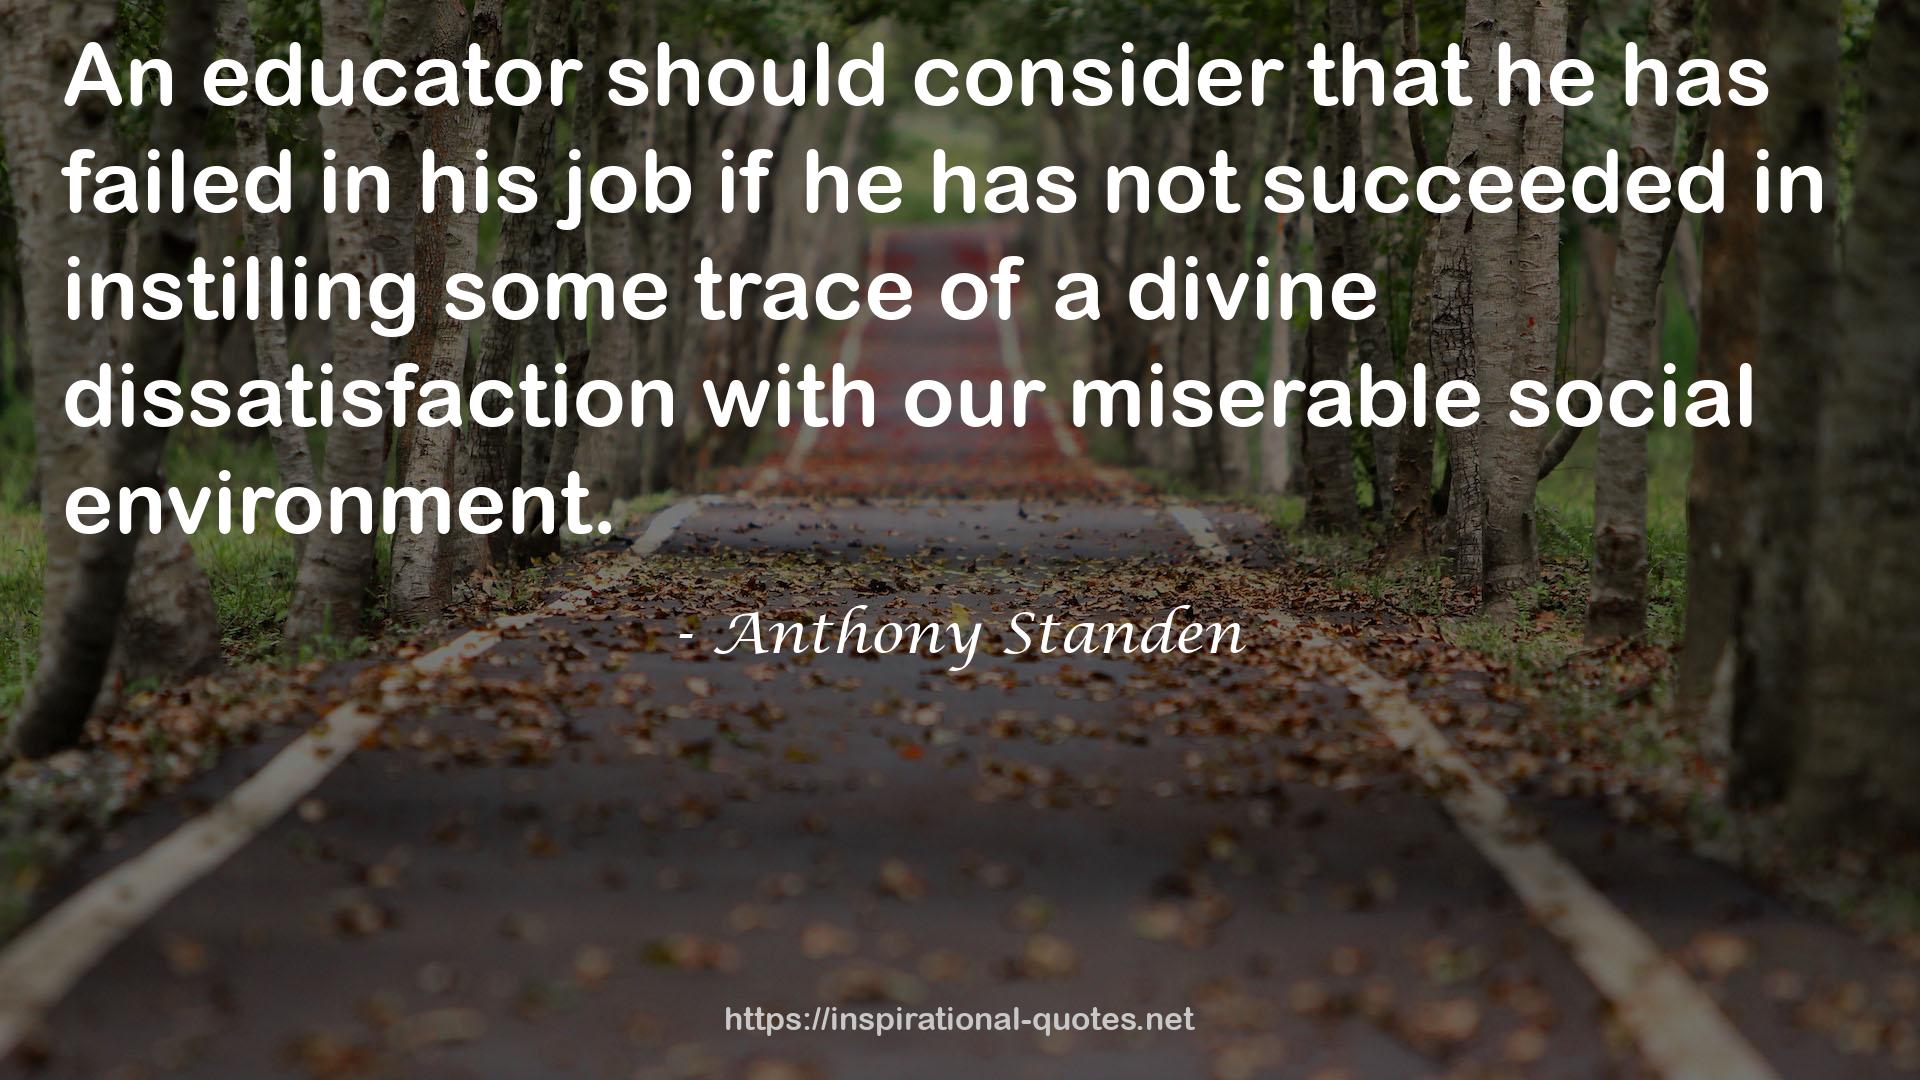 Anthony Standen QUOTES